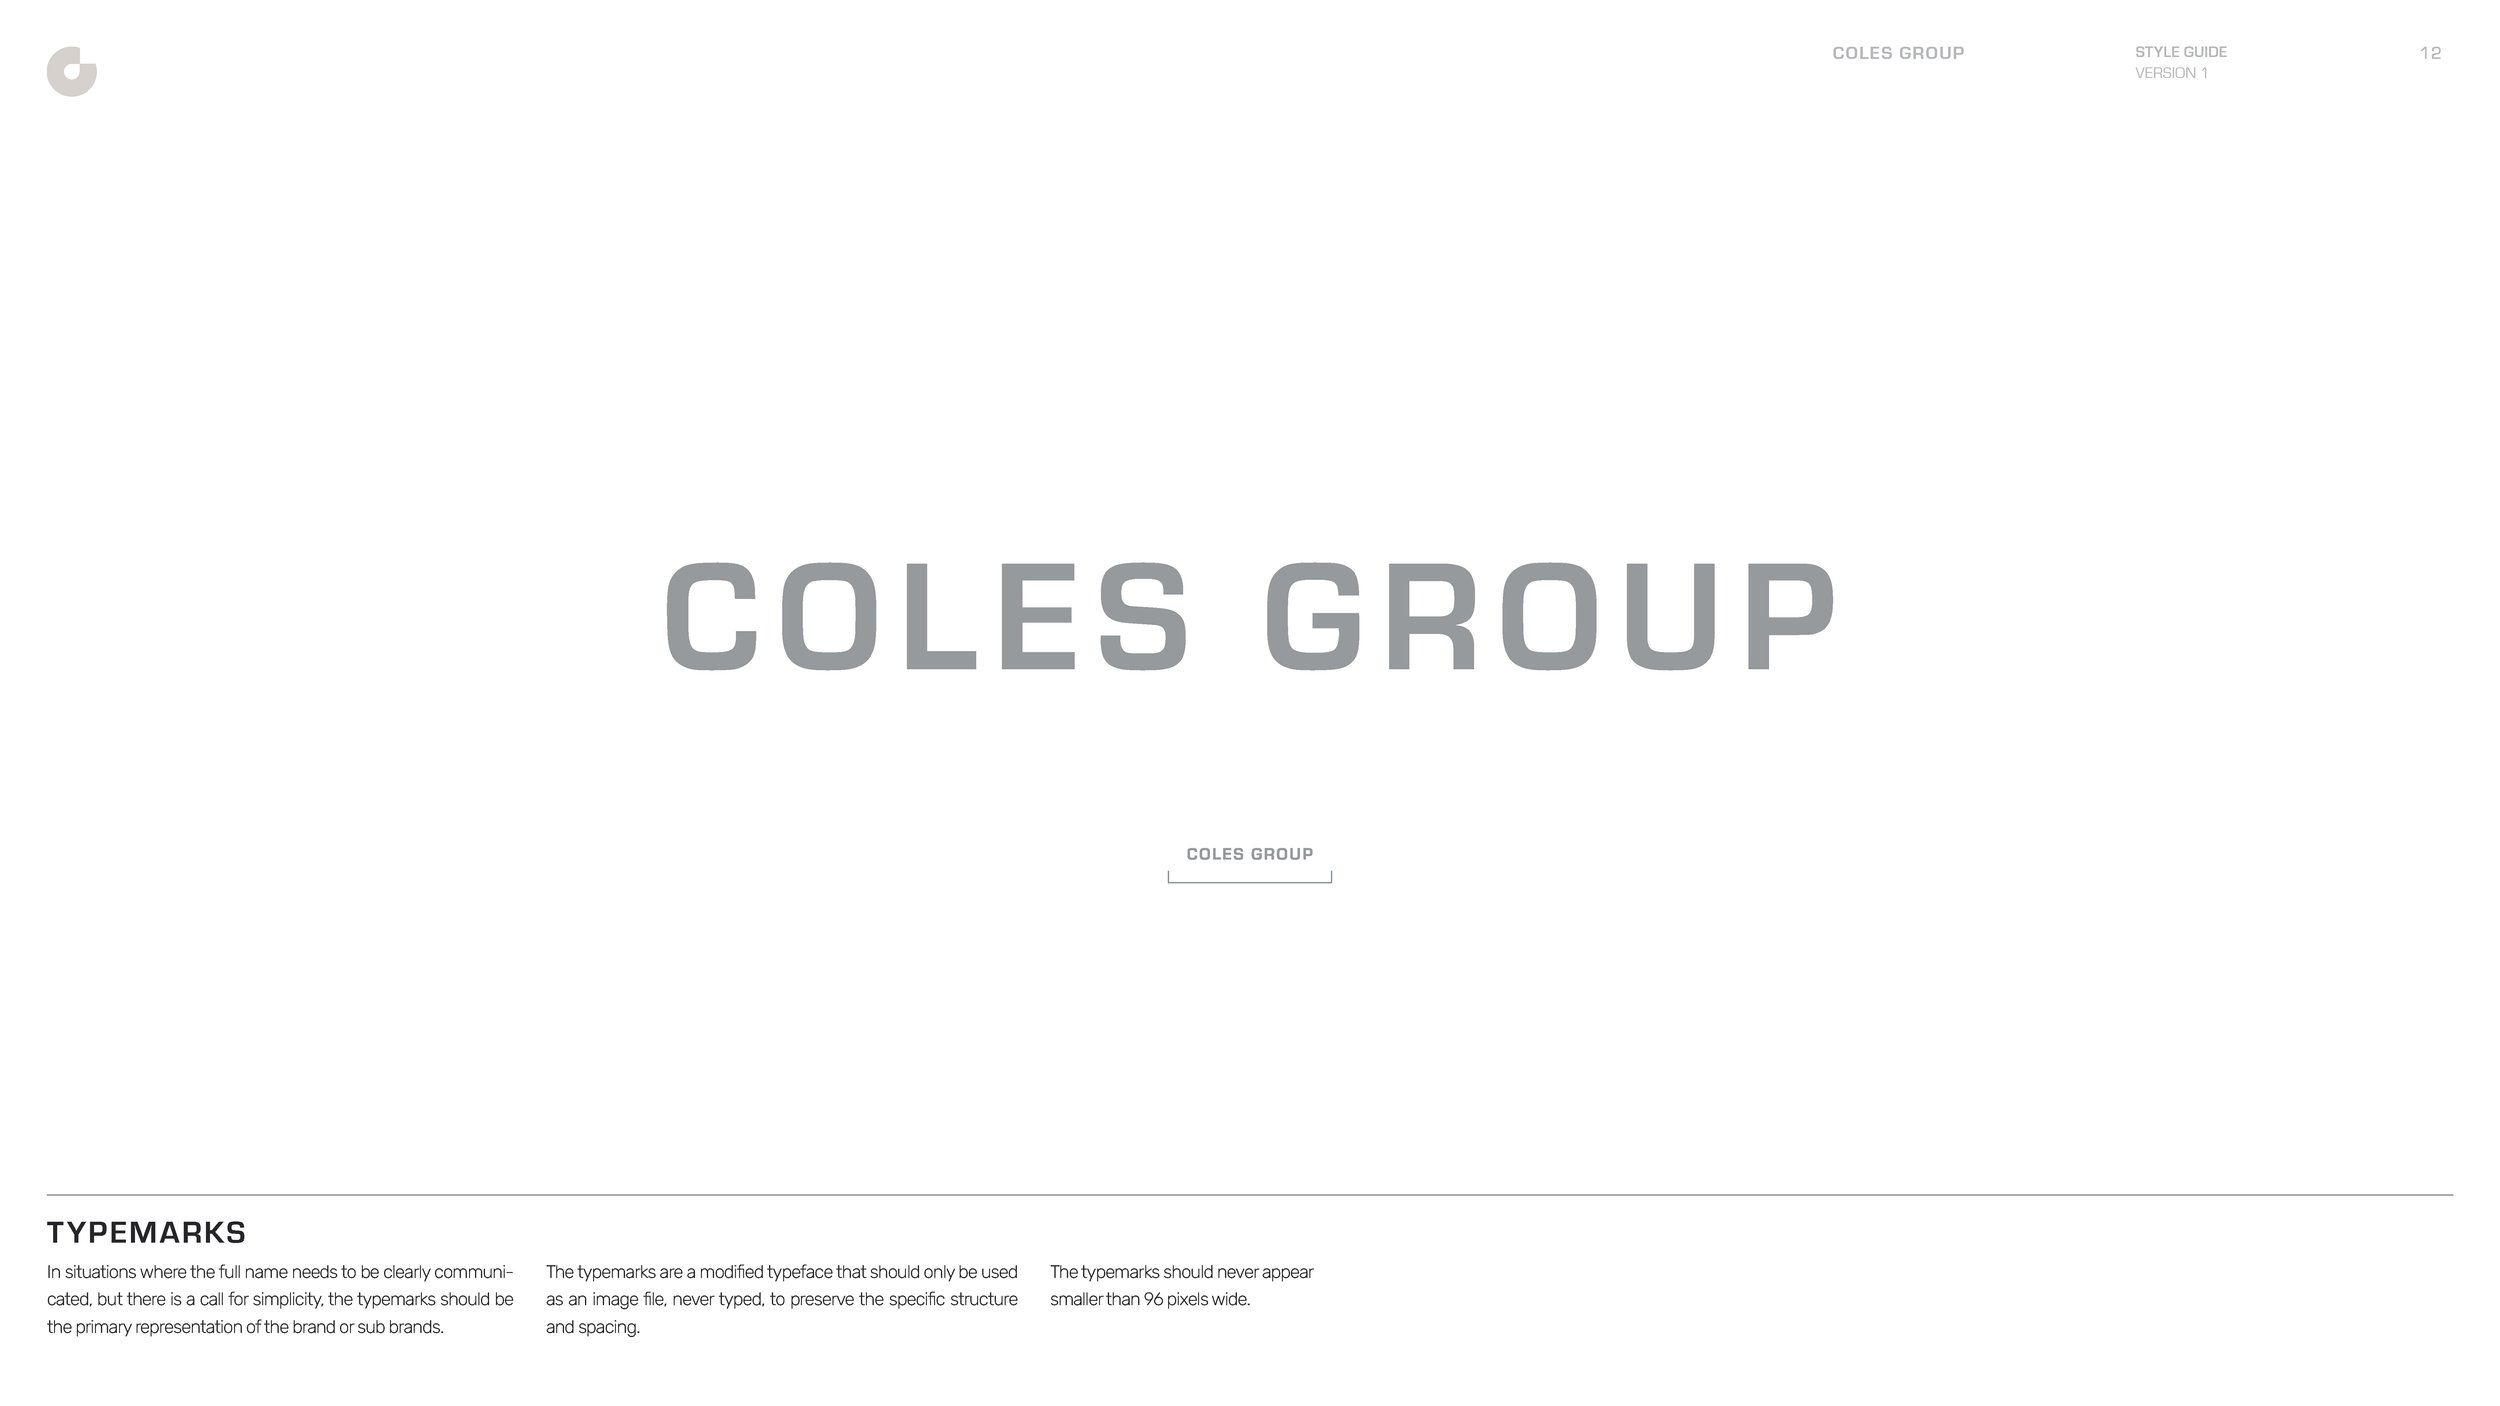 Coles-Group_Brand Guidelines_060321_Page_12.jpg